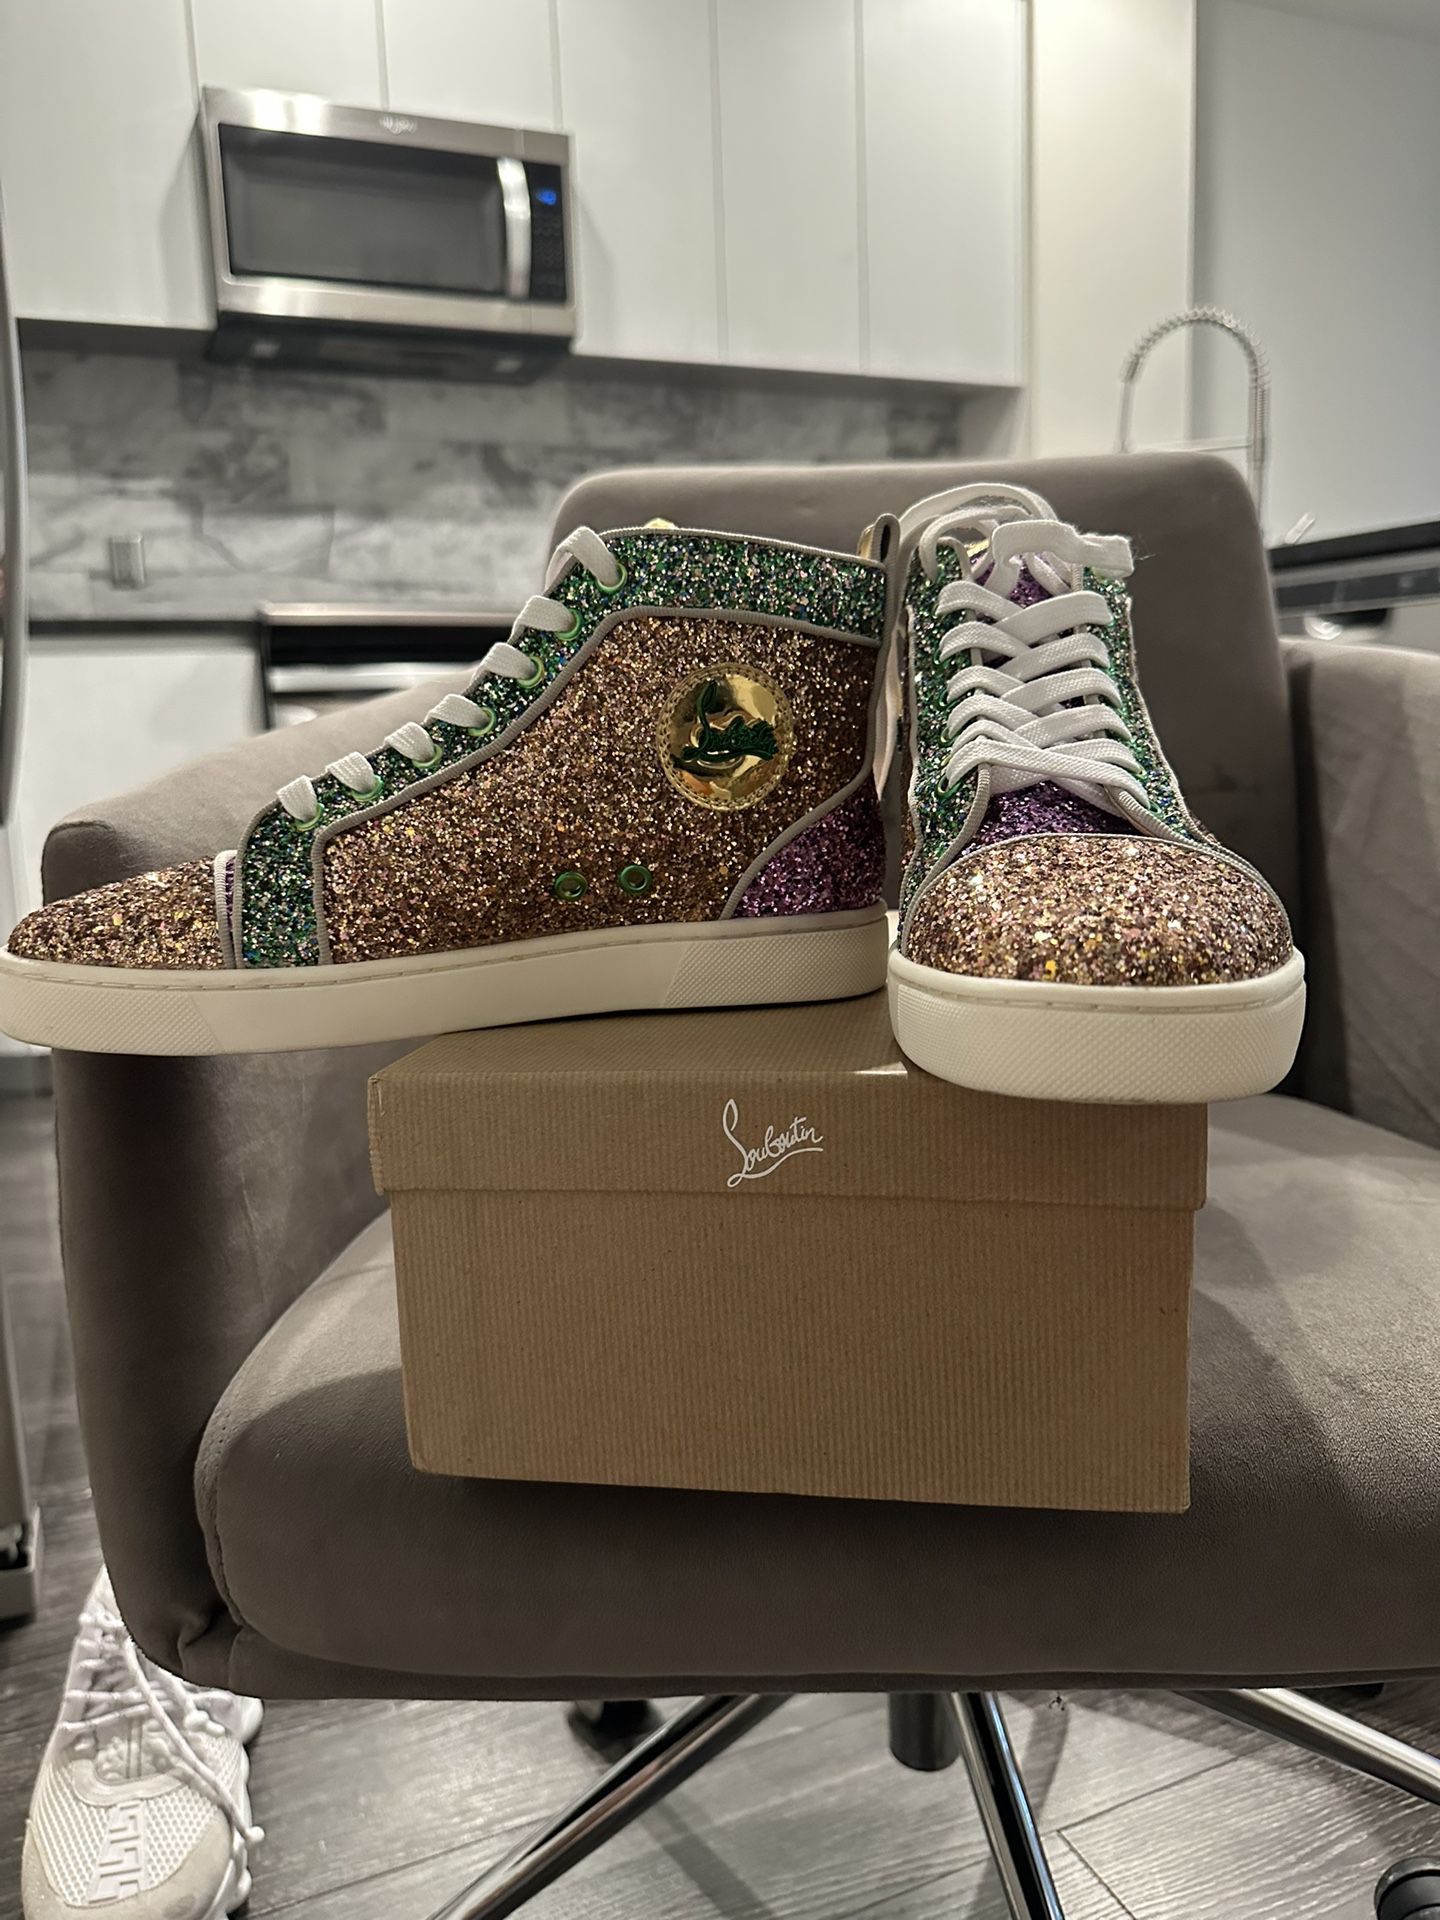 Louis Allover Spikes High Top Sneaker CHRISTIAN LOUBOUTIN for Sale in  Glendale, CA - OfferUp